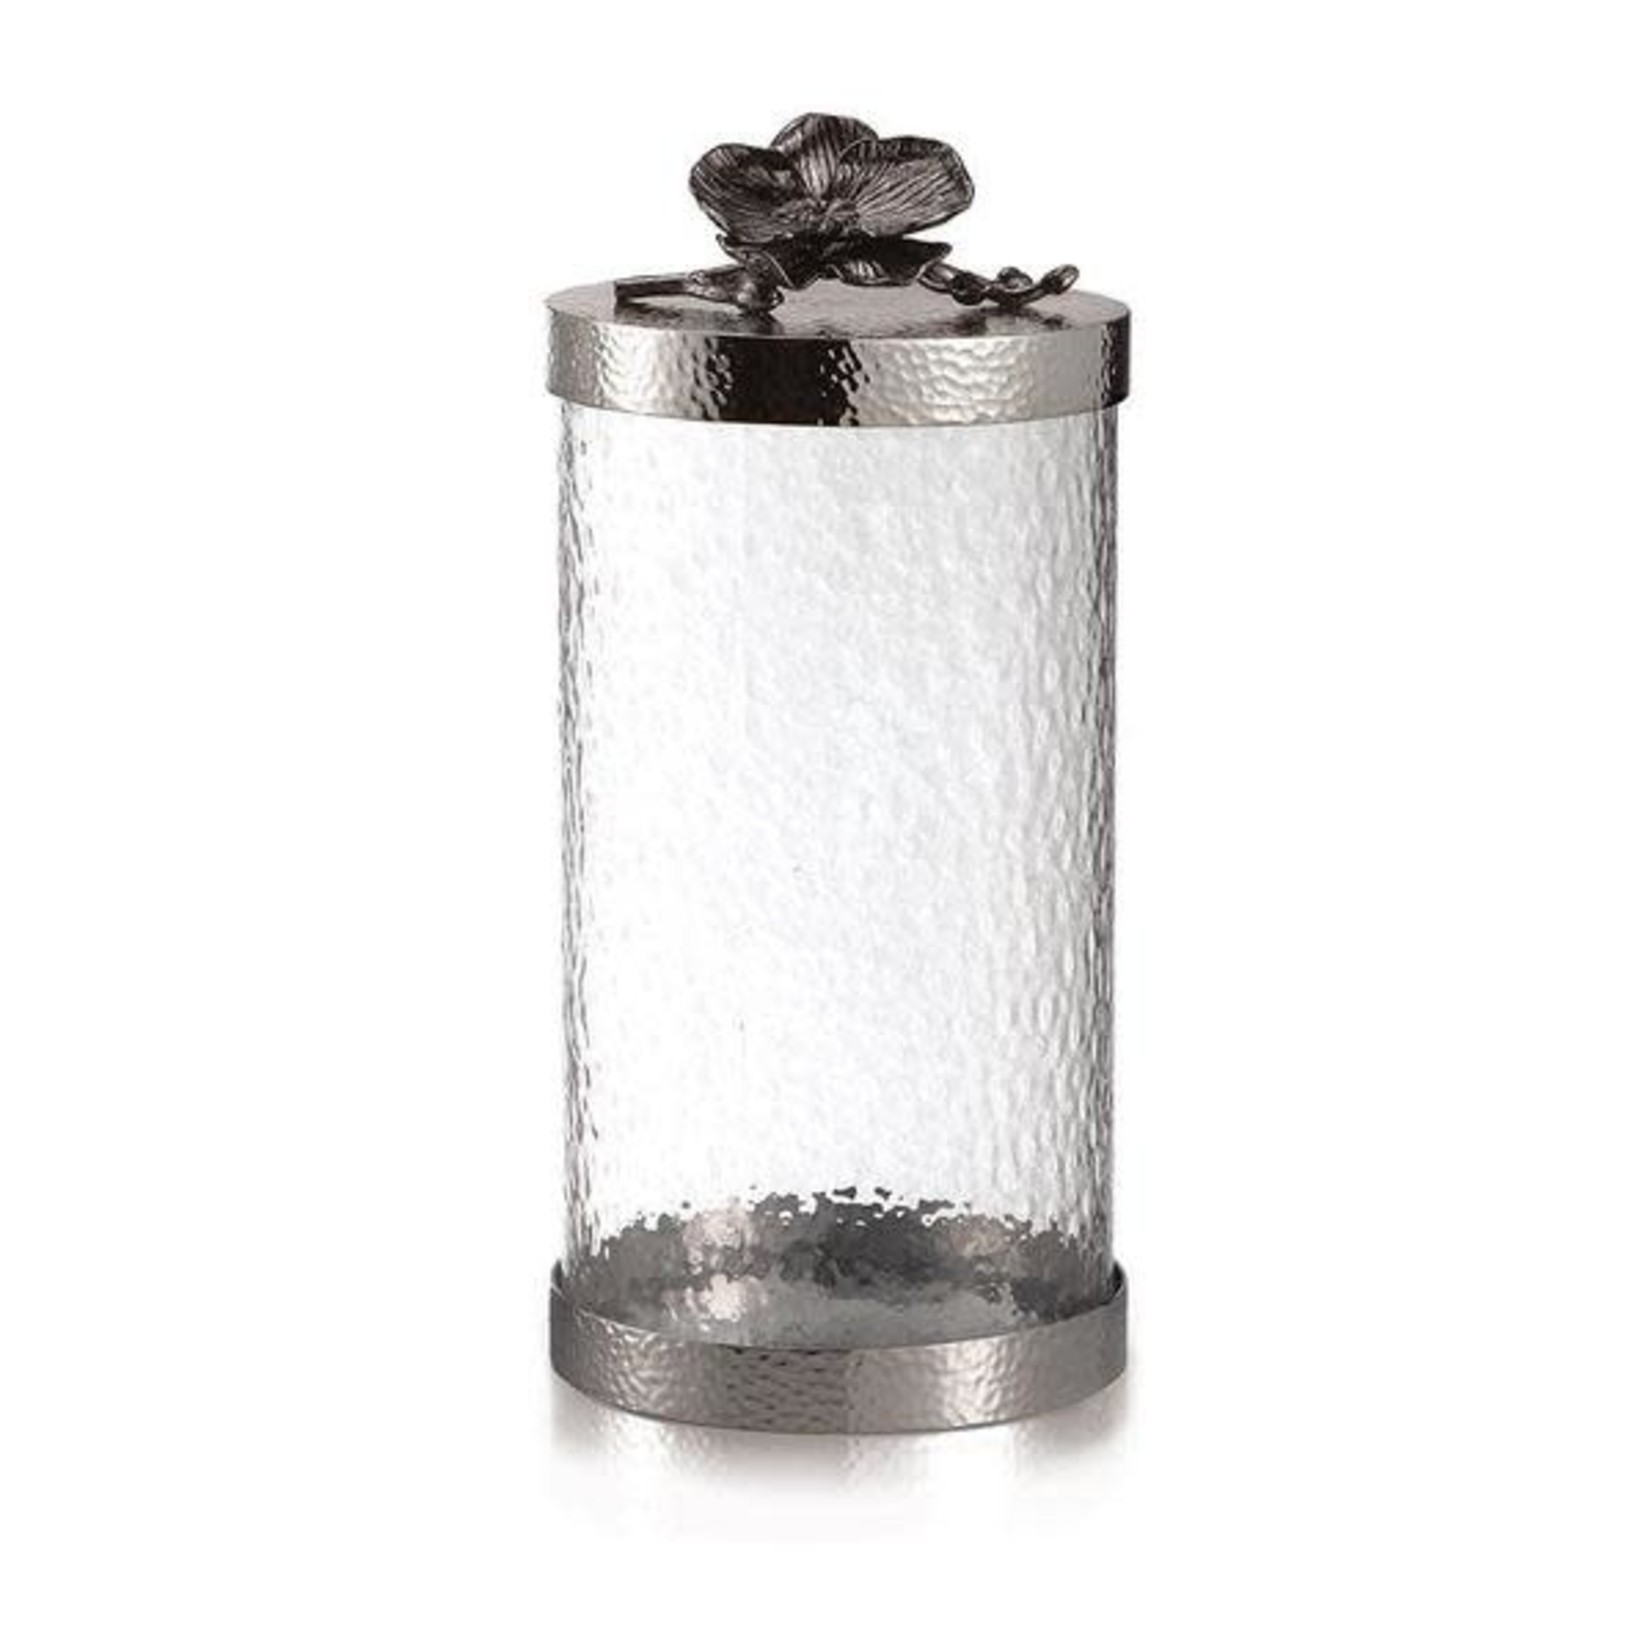 Michael Aram Black Orchid Canister Large